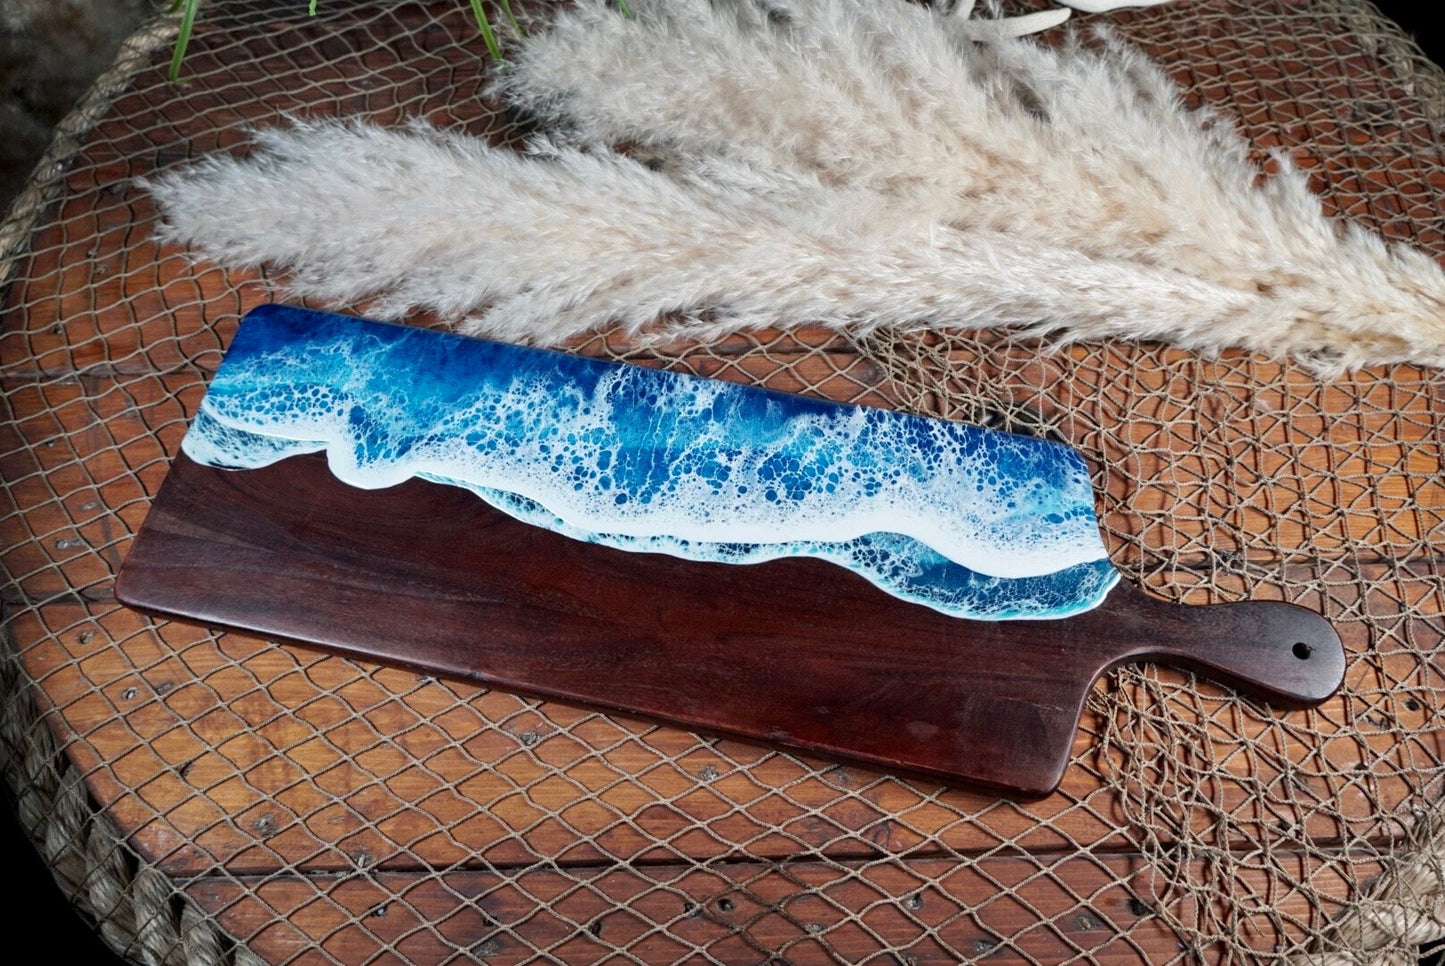 Large Dark Wooden Ocean Waves Serving Tray, Charcuterie Board, Cheese Board